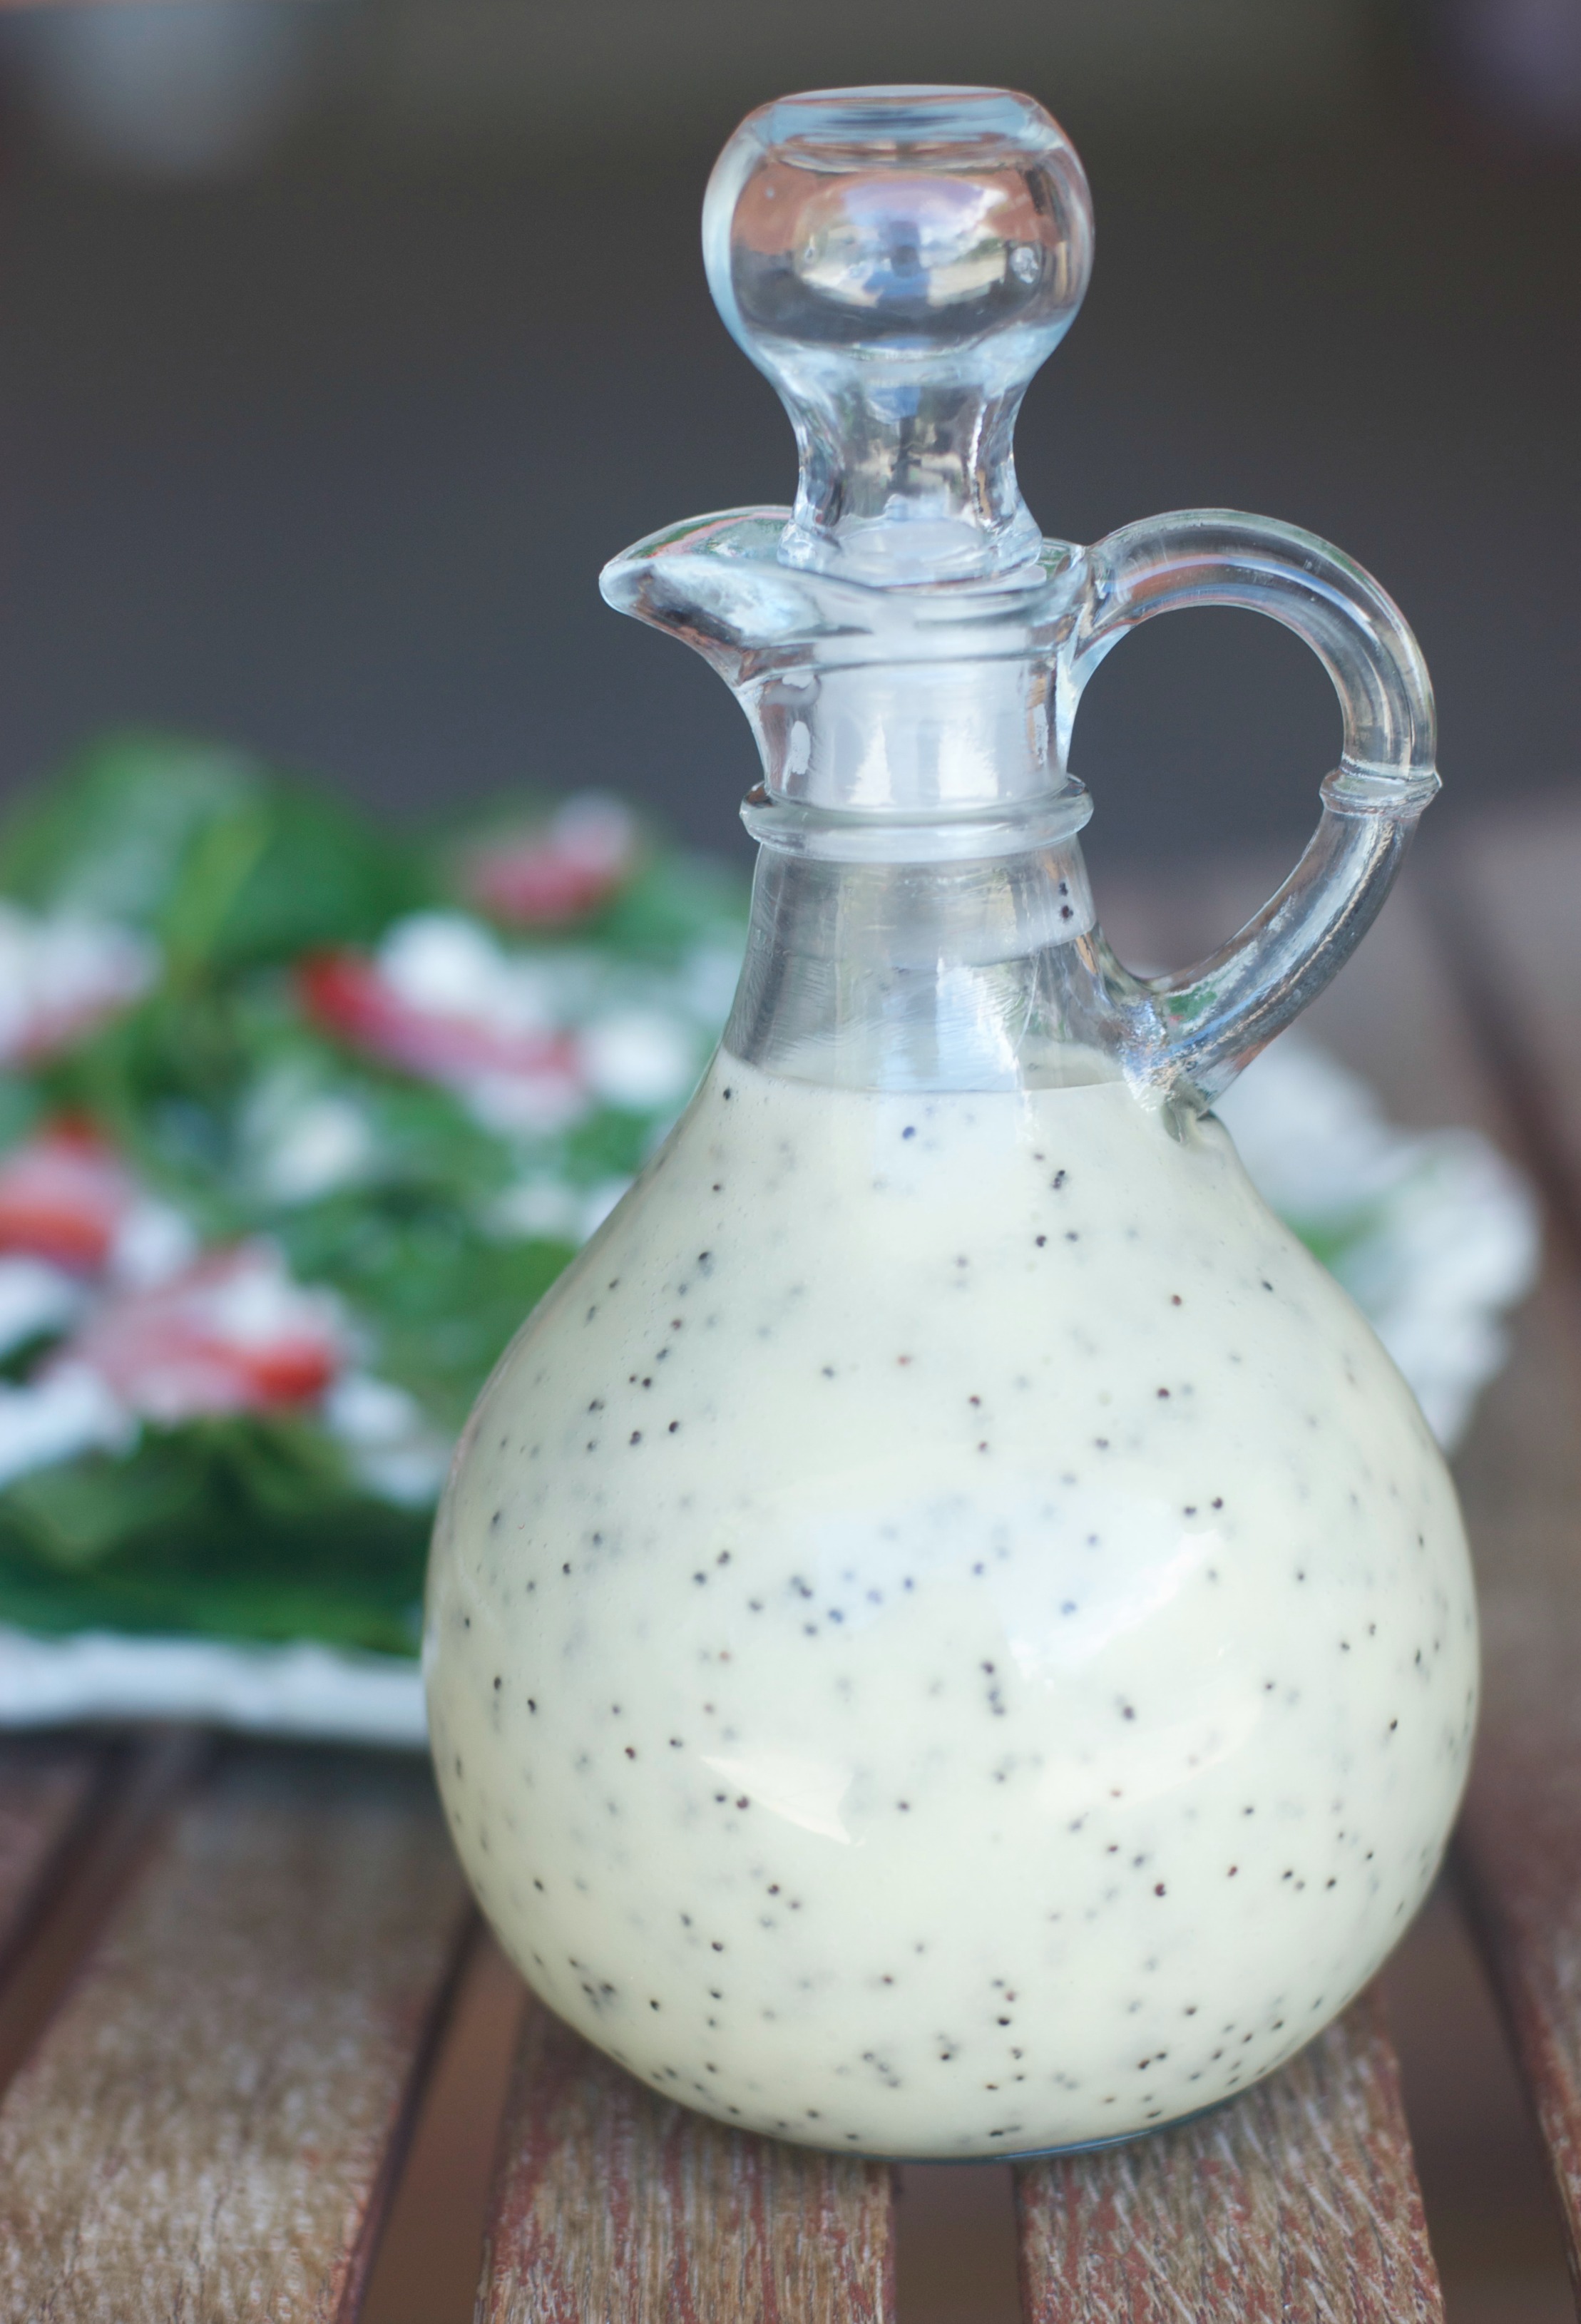 https://www.thisgrandmaisfun.com/wp-content/uploads/2014/08/Four-ingredients.-Five-minutes.-Super-quick-and-easy-Lime-Poppy-Seed-Dressing.jpg